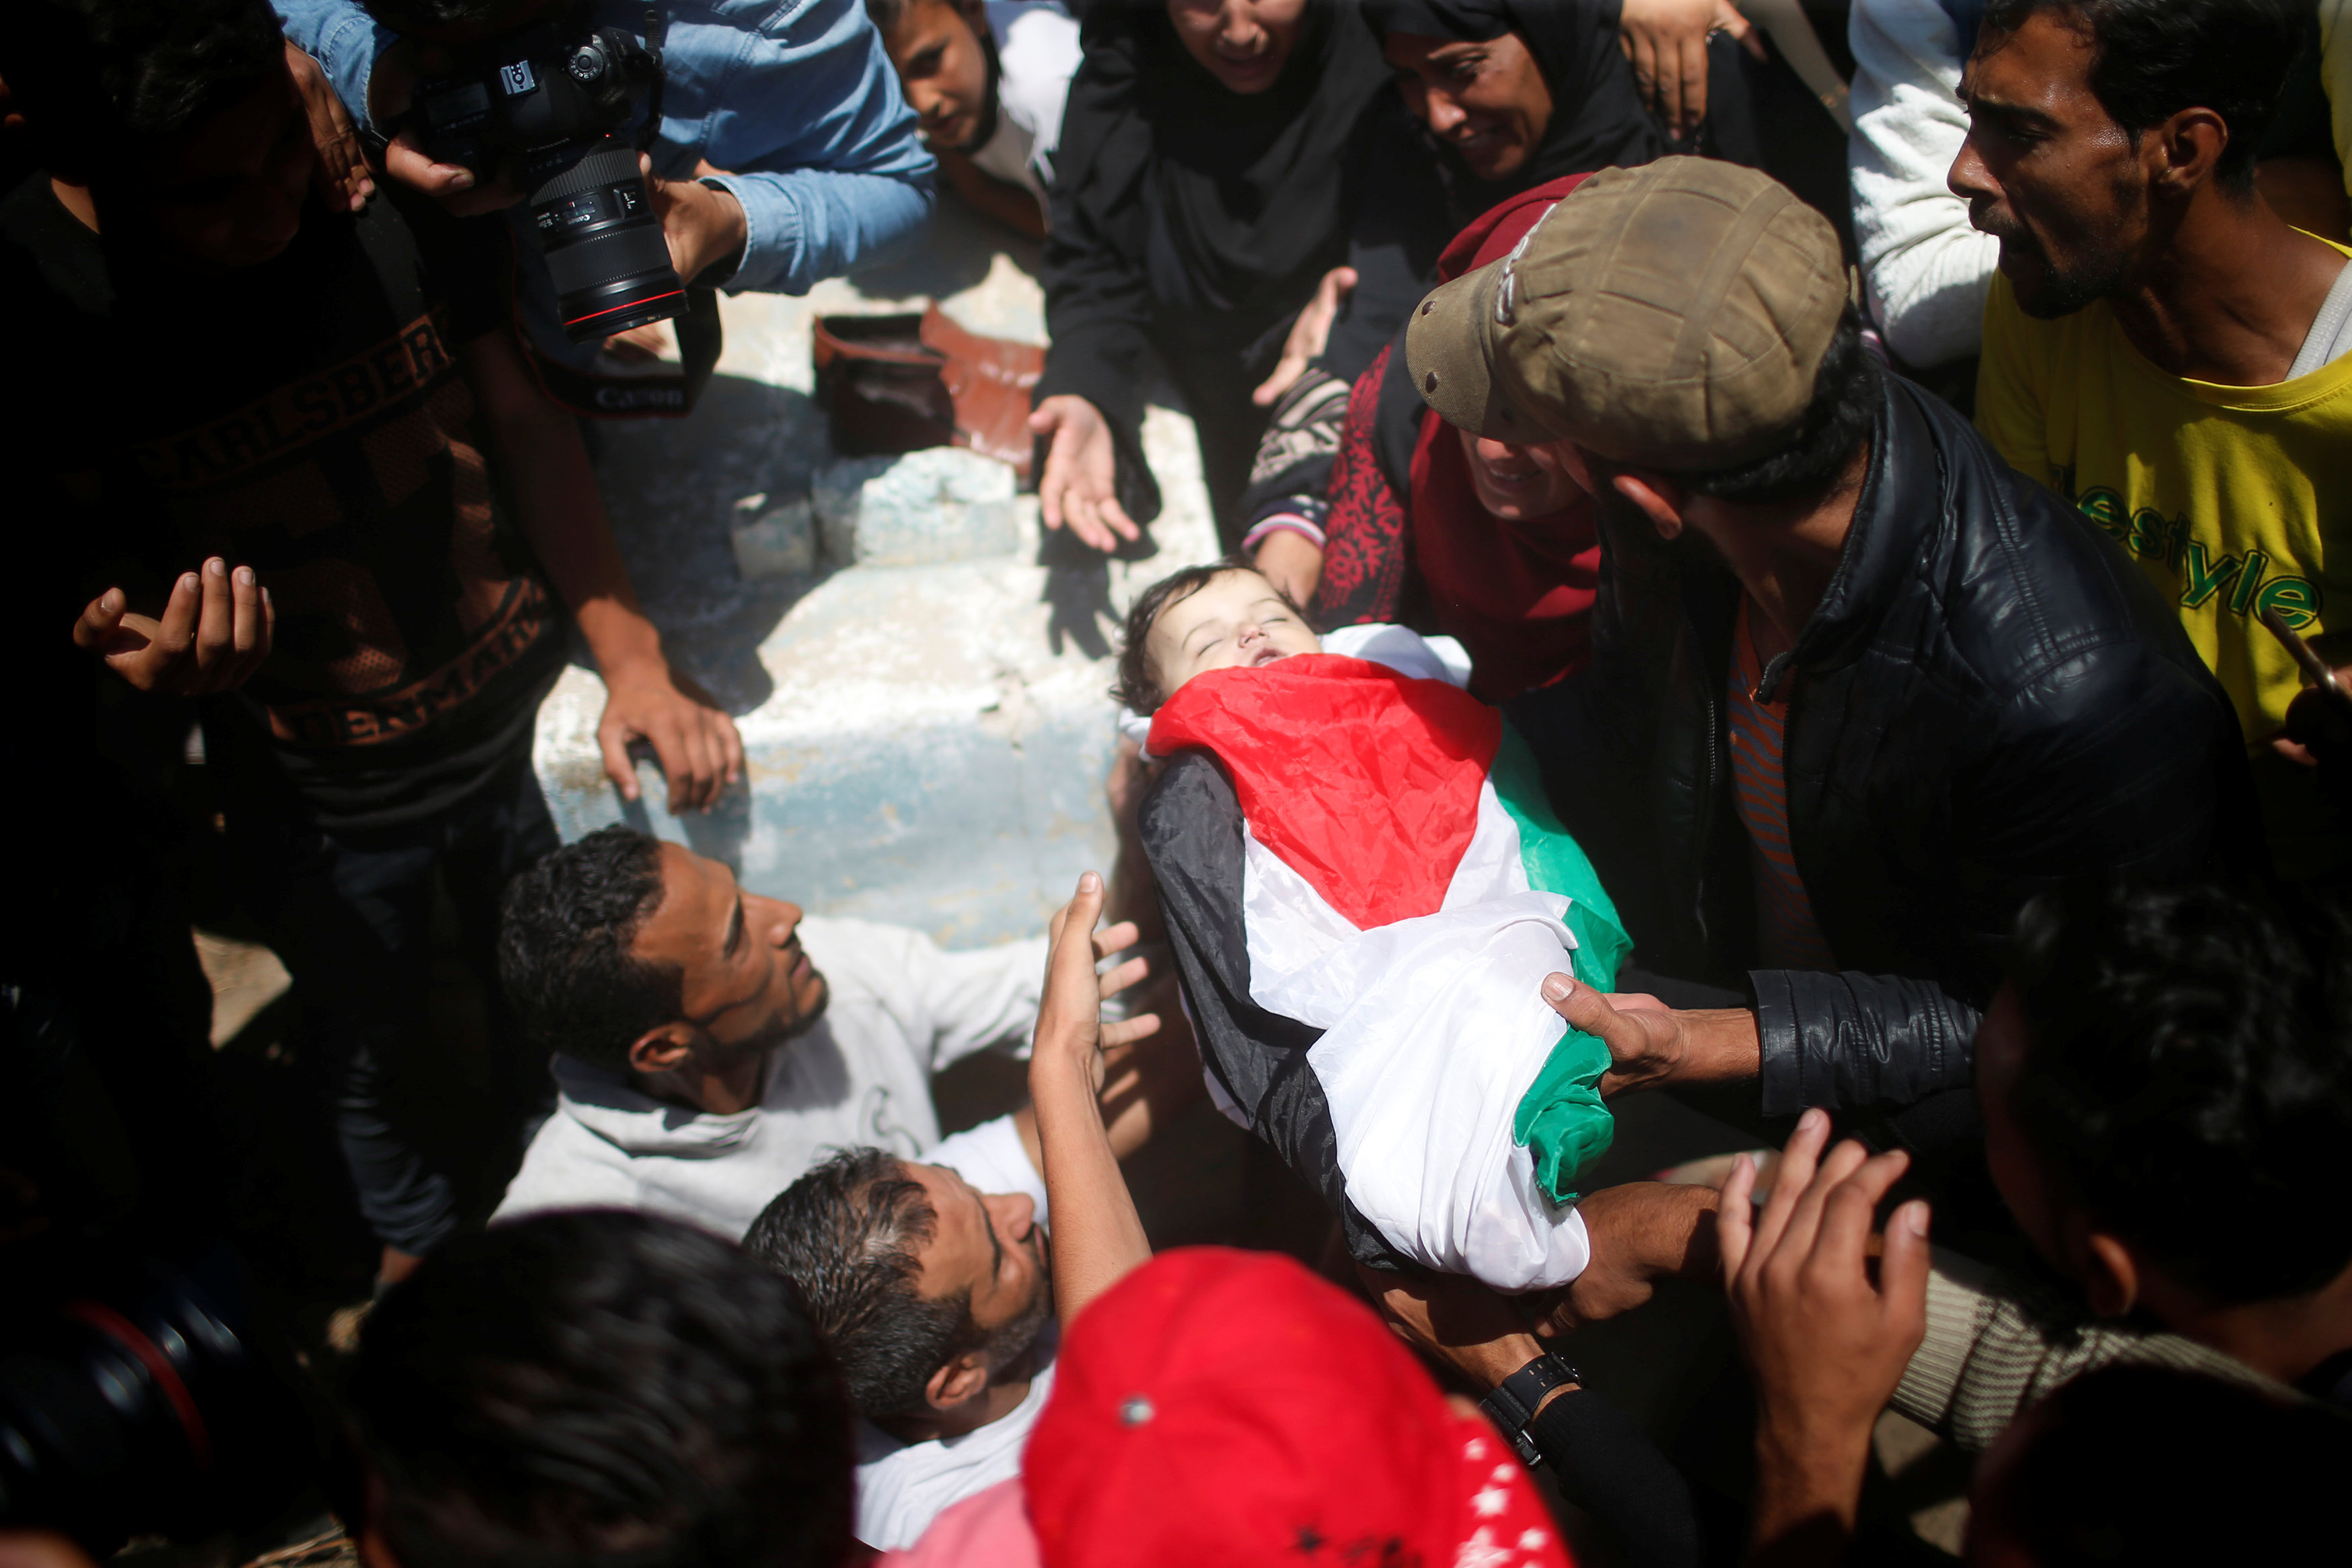 Mourners bury the body of eight-month-old Palestinian infant Laila al-Ghandour, who died after inhaling tear gas during a protest against U.S embassy move to Jerusalem at the Israel-Gaza border, during her funeral in Gaza City